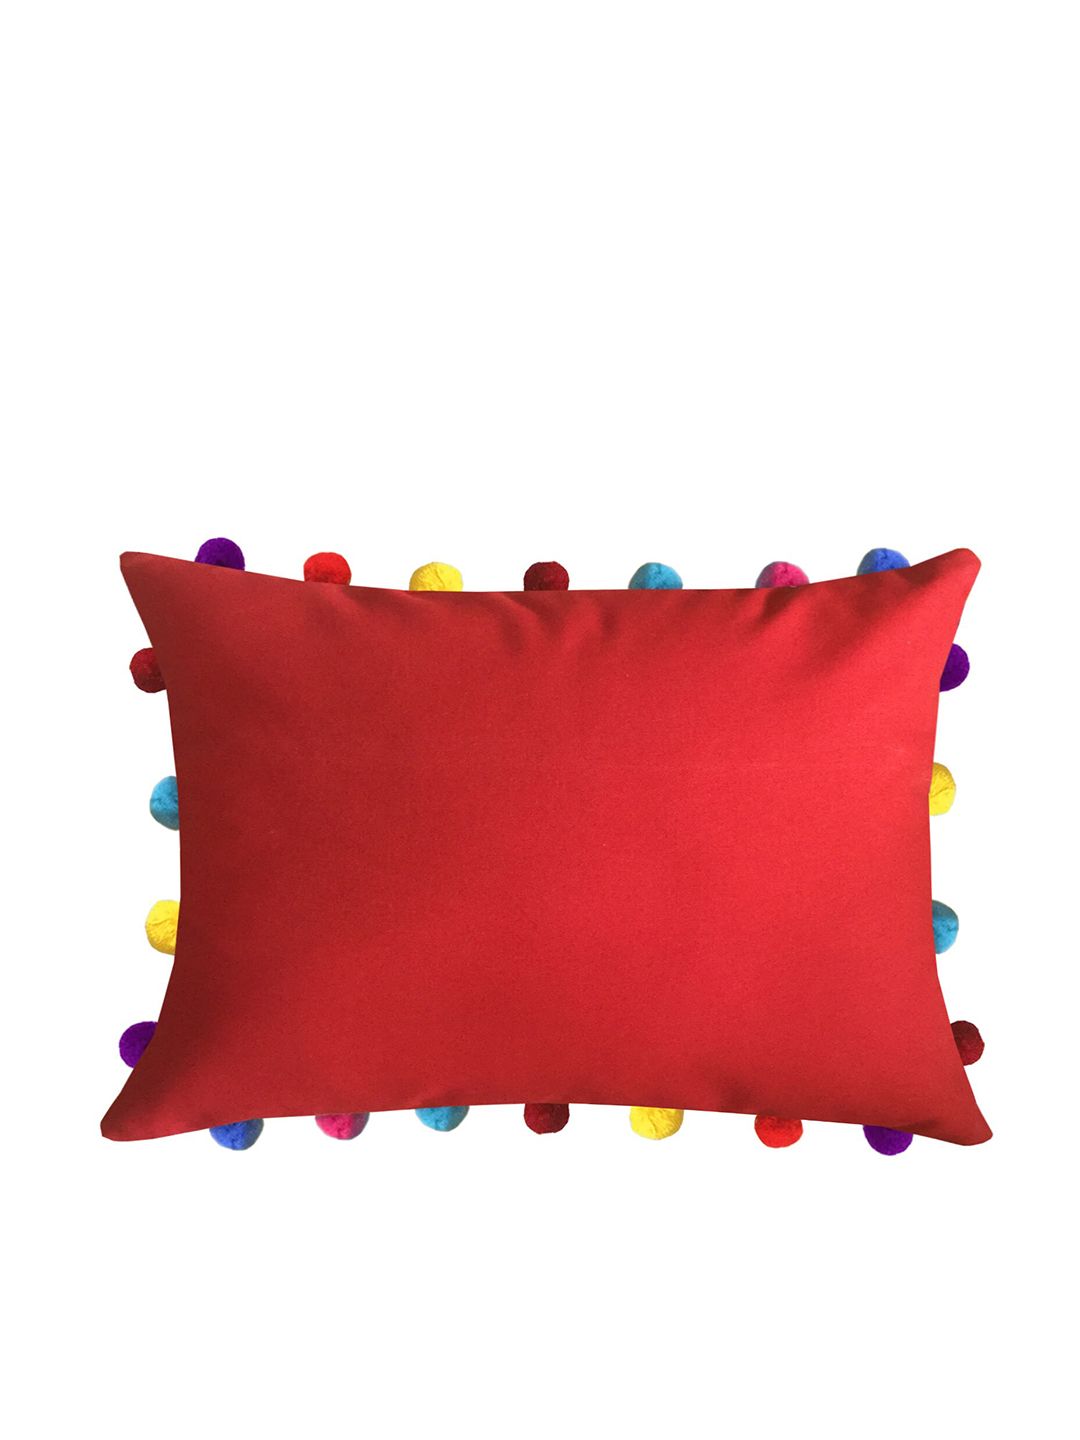 Lushomes Red Pure Cotton Solid Cushion Covers with Colorful Tassels Price in India